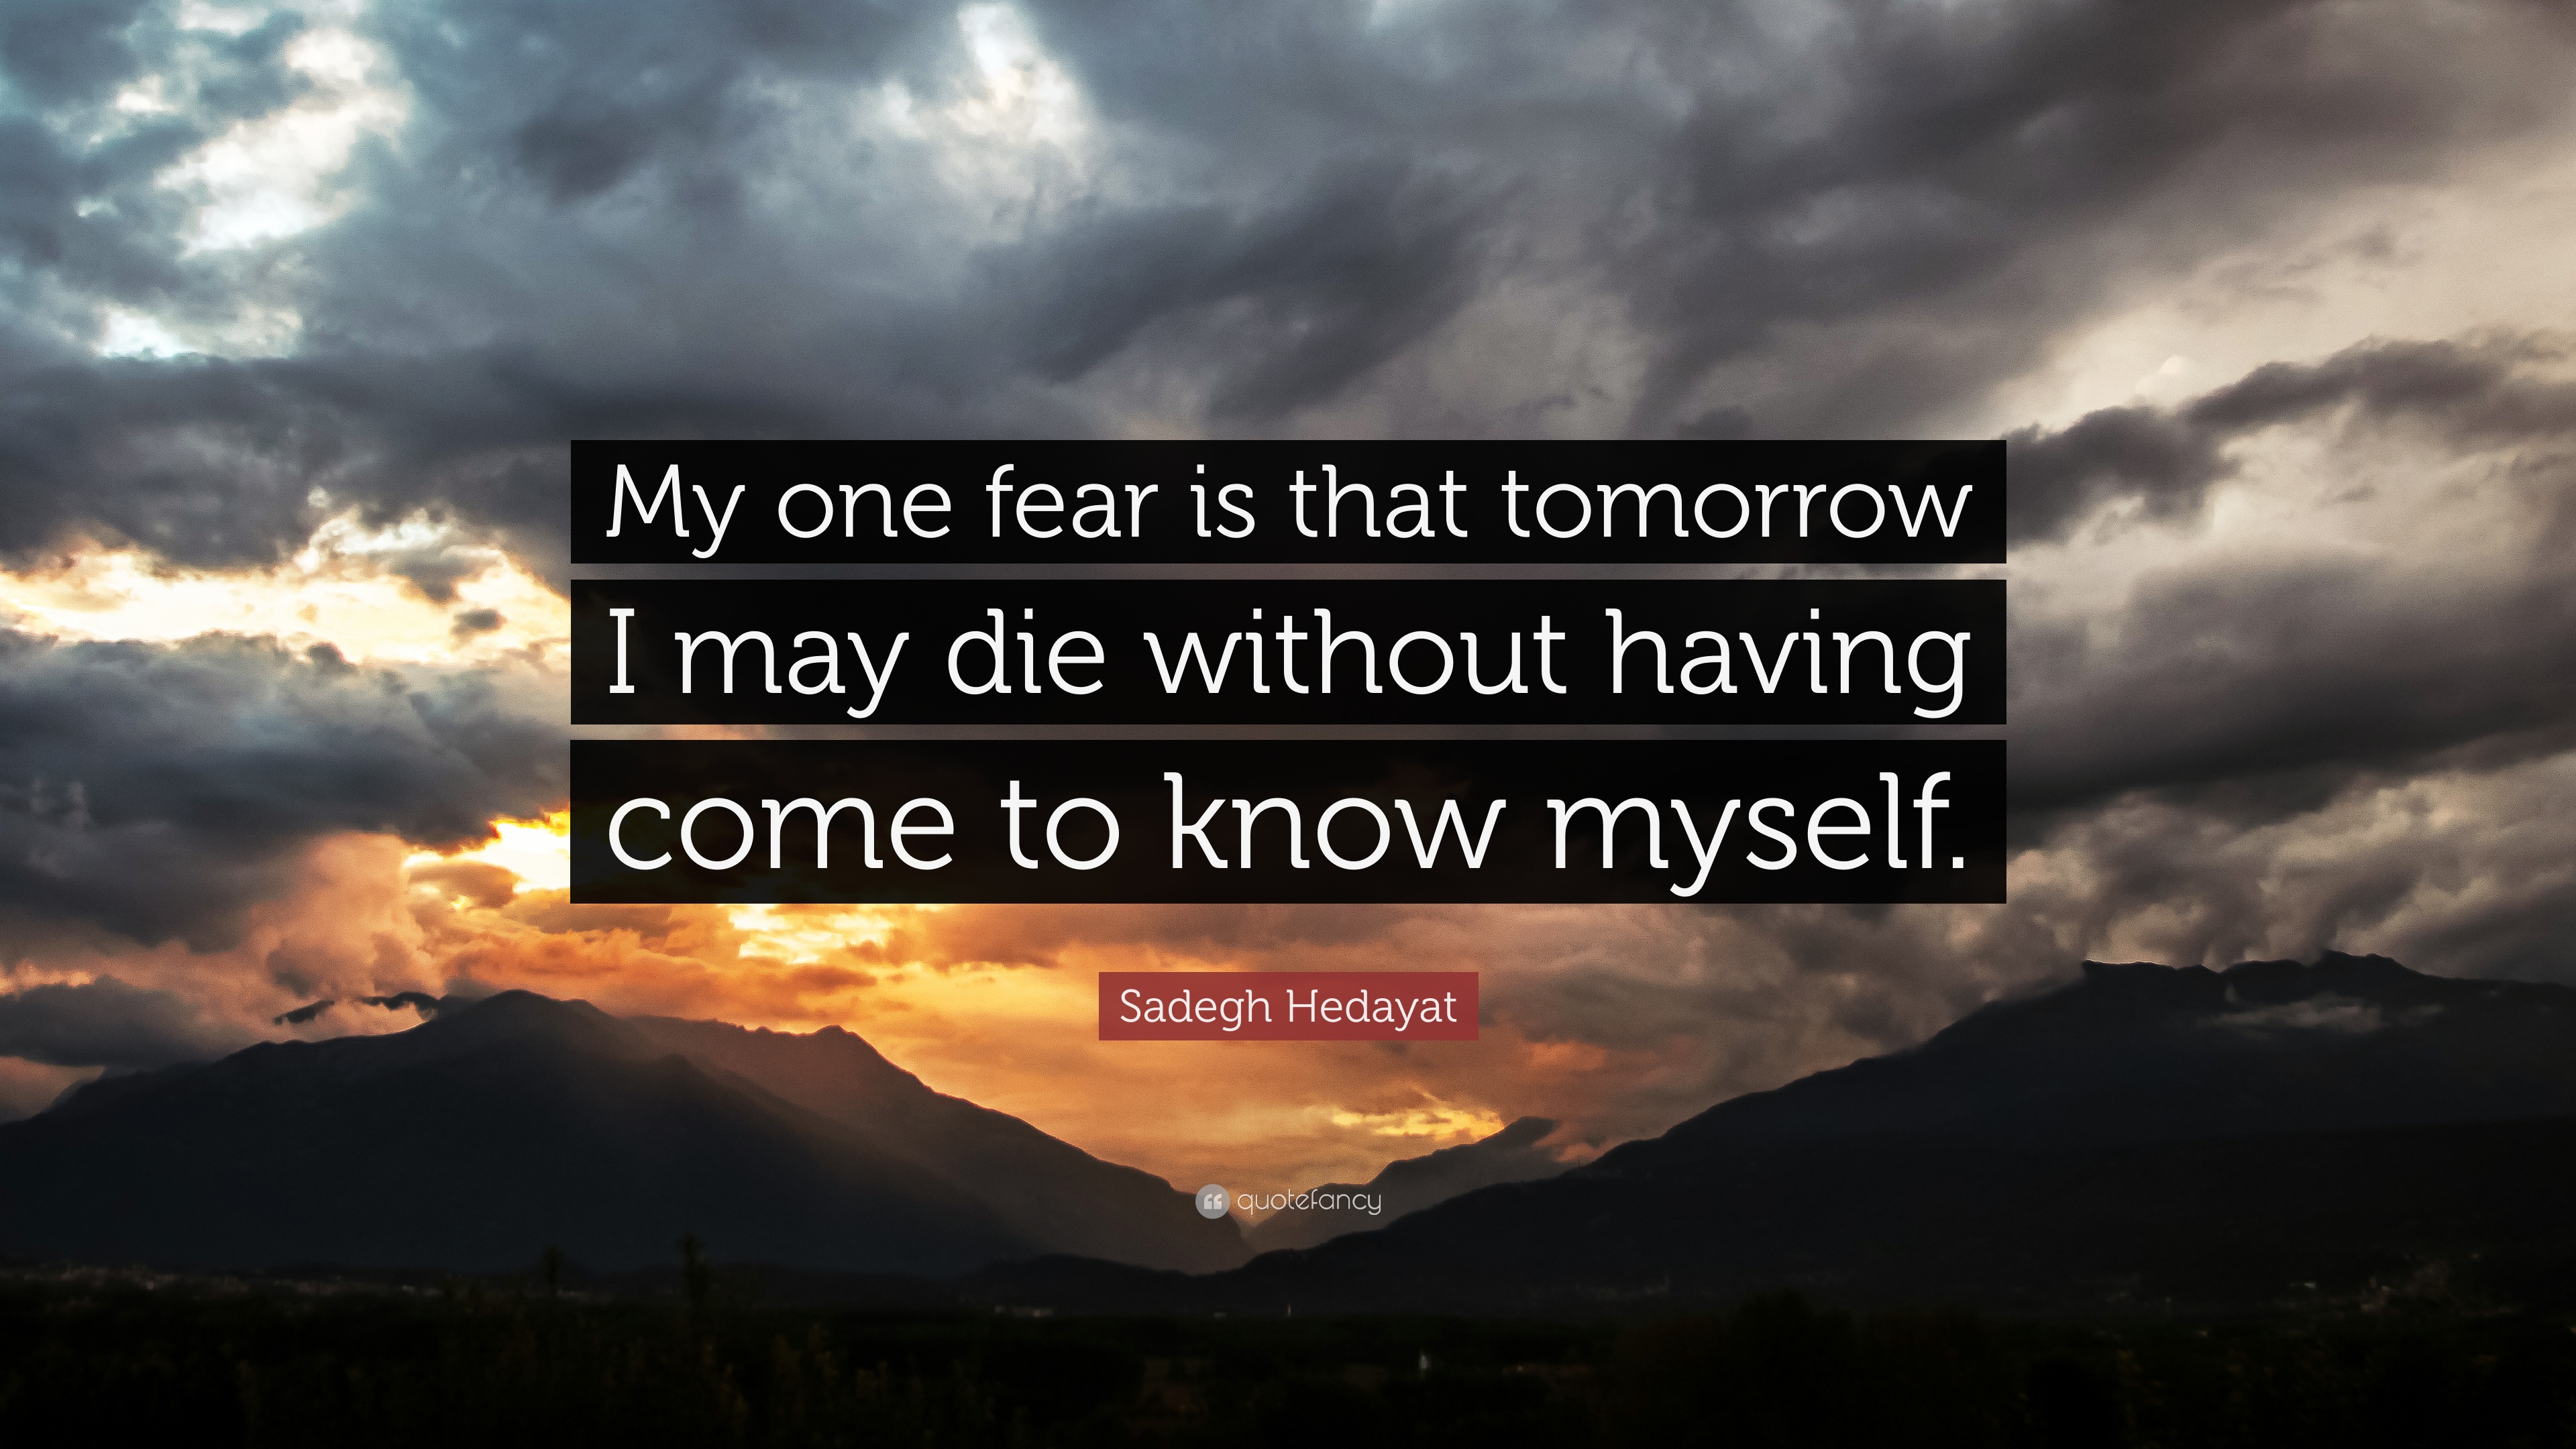 Sadegh Hedayat Quote: “My one fear is that tomorrow I may die without ...